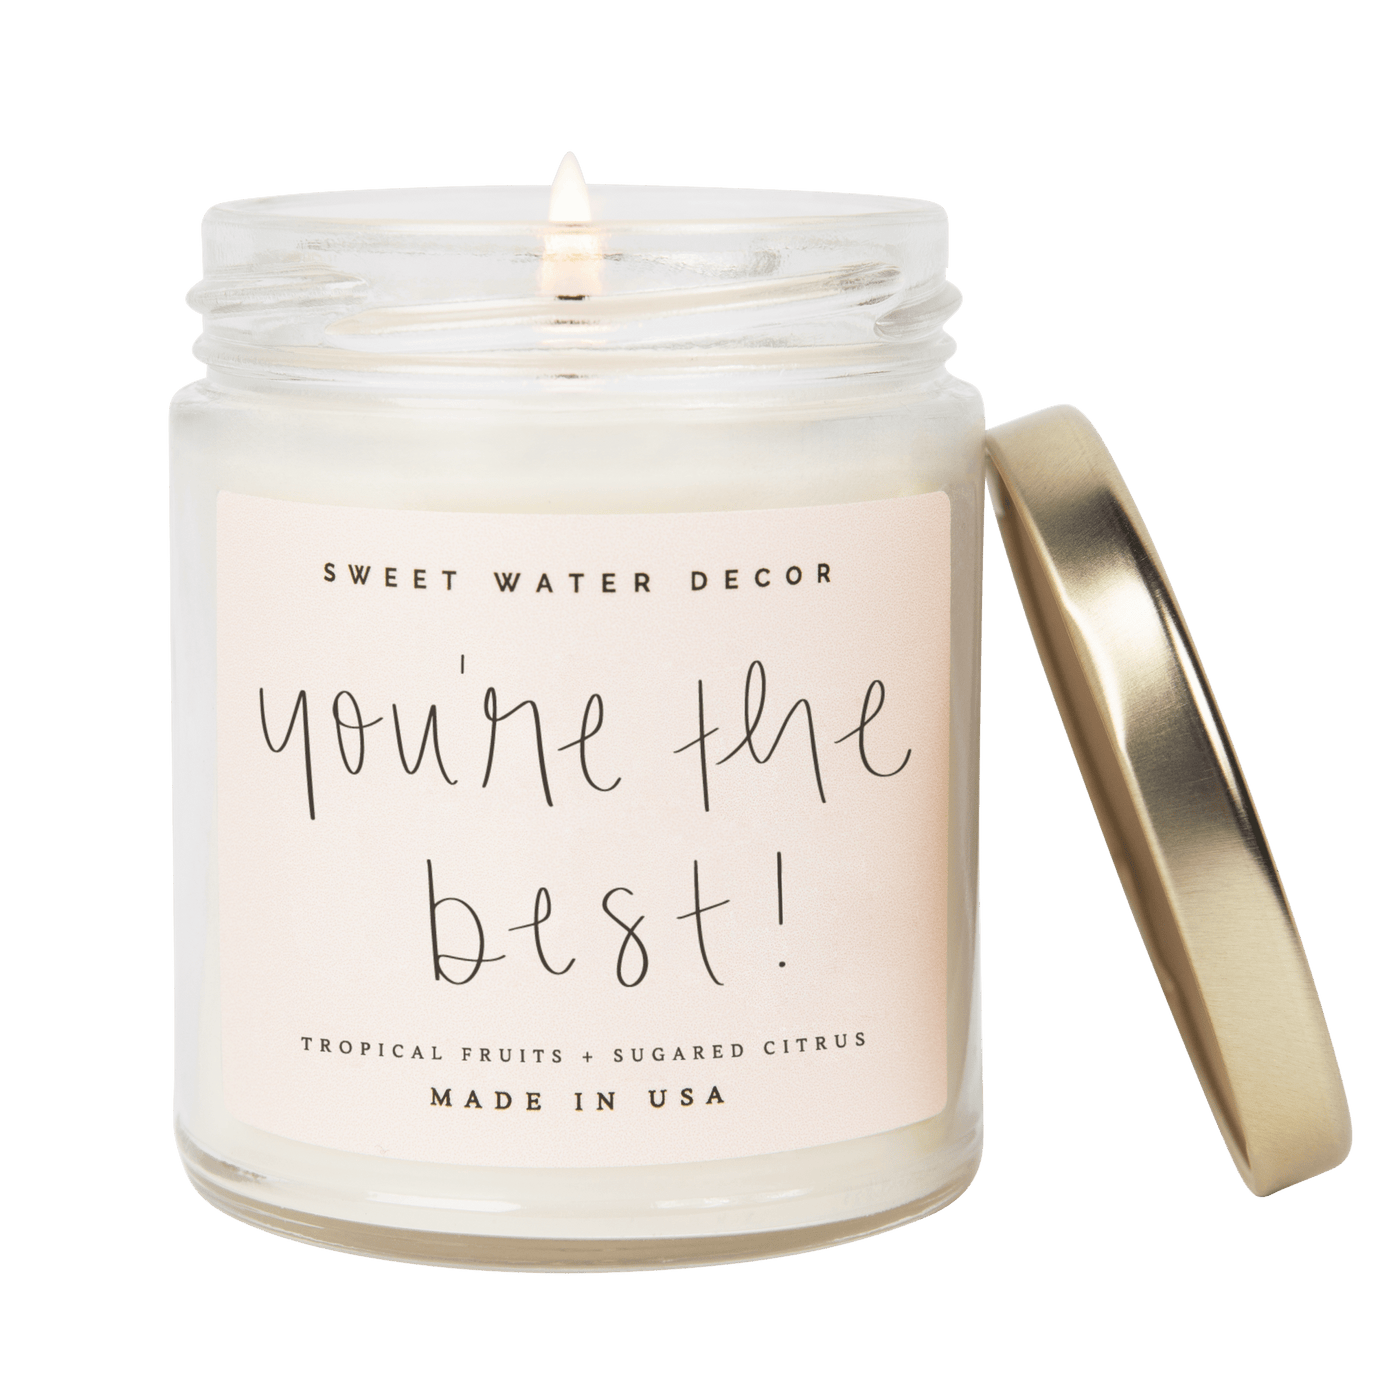 You're The Best! Soy Candle - Clear Jar - 9 oz - Sweet Water Decor - Candles